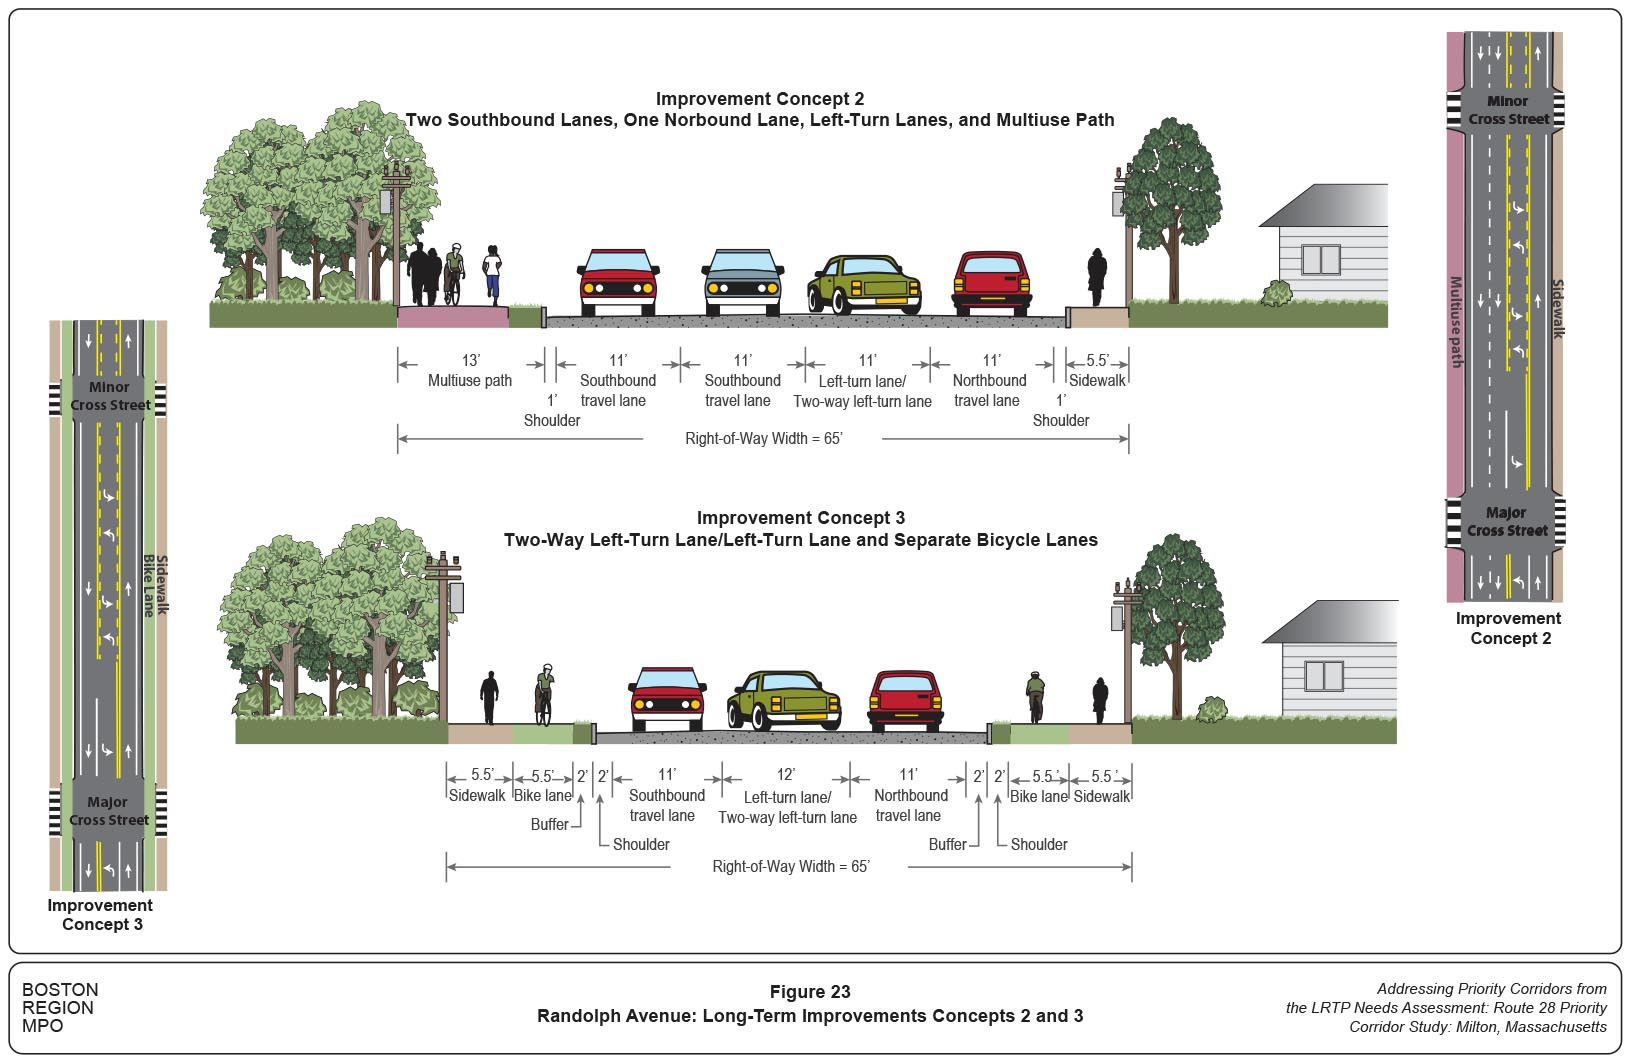 Figure 23
Randolph Avenue: Long-Term Improvements Concept 2 and 3
Figure 23 shows the cross-sectional configuration of Randolph Avenue long-term improvements for Concepts 2 and 3.
